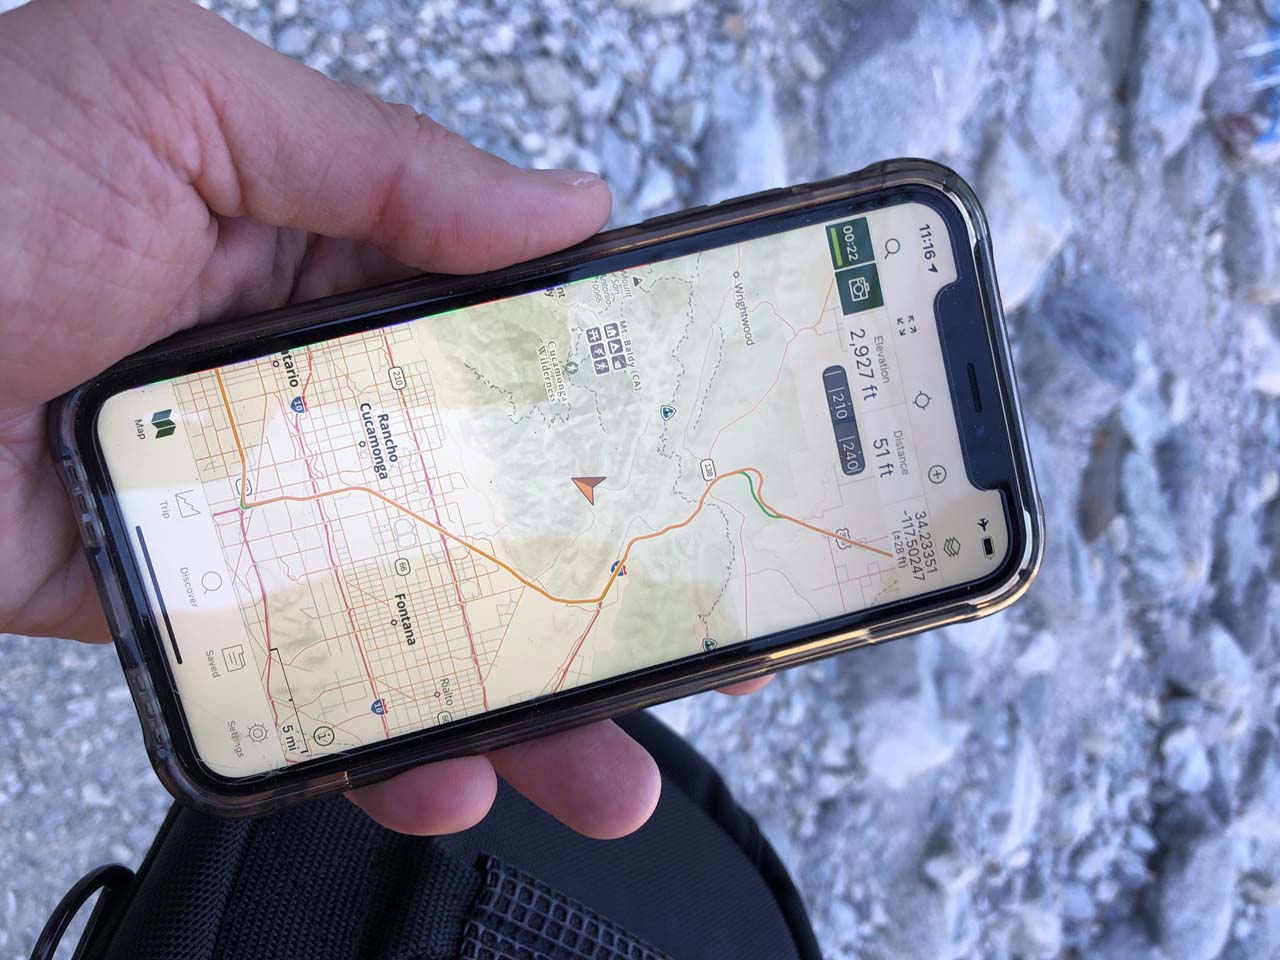 Gaia GPS has proven to be a powerful tool, especially considering the manner and types of hikes that I've done over the years